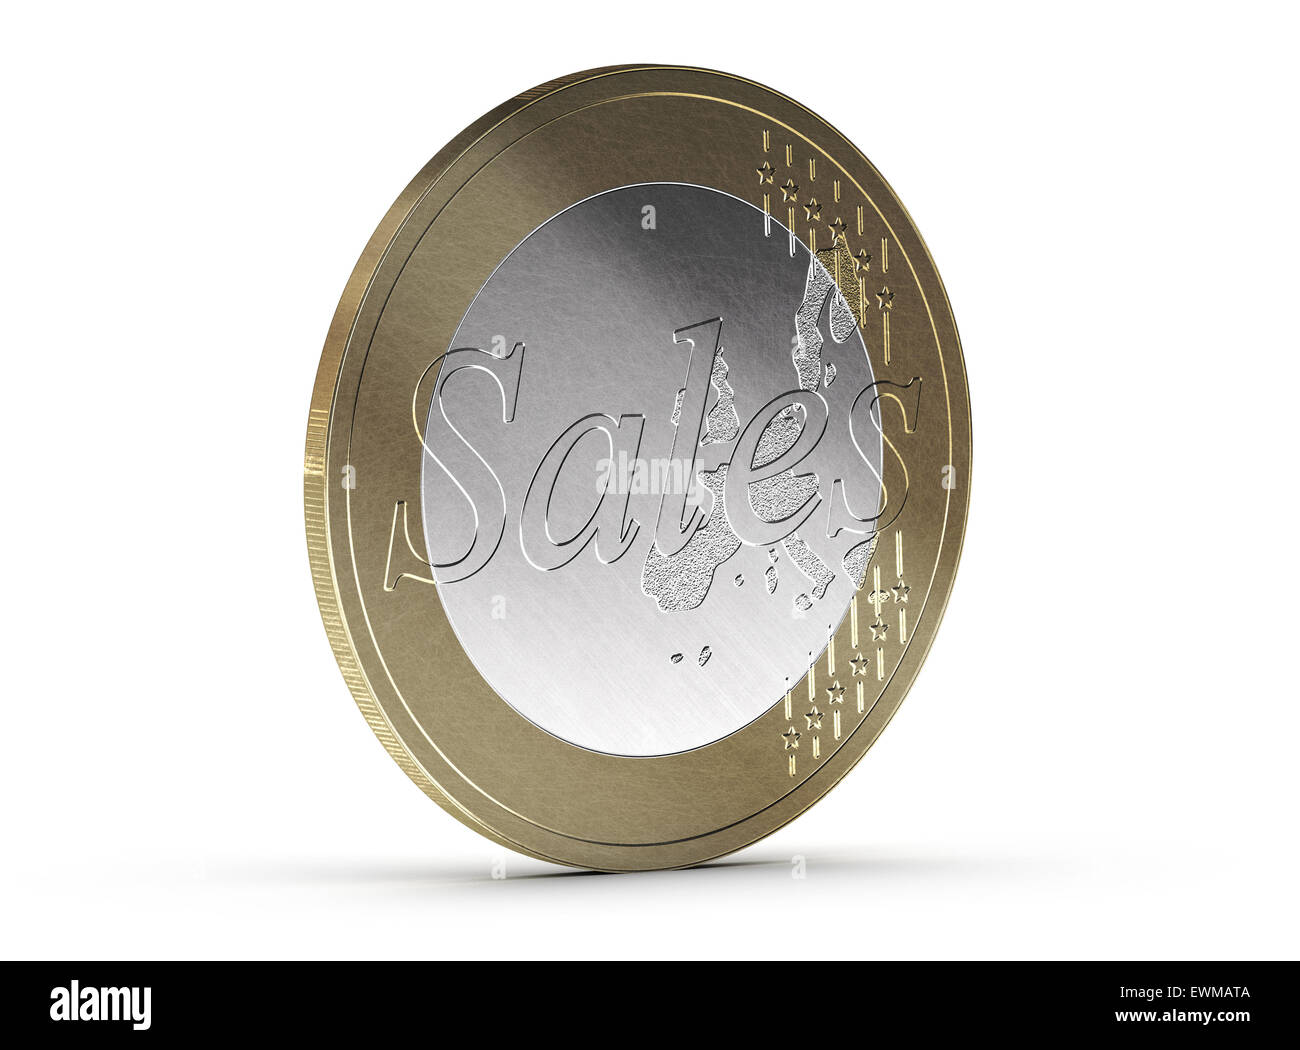 Sales euro coin over white background with shadow and scratches. Conceptual image for business incentive or motivation. Stock Photo